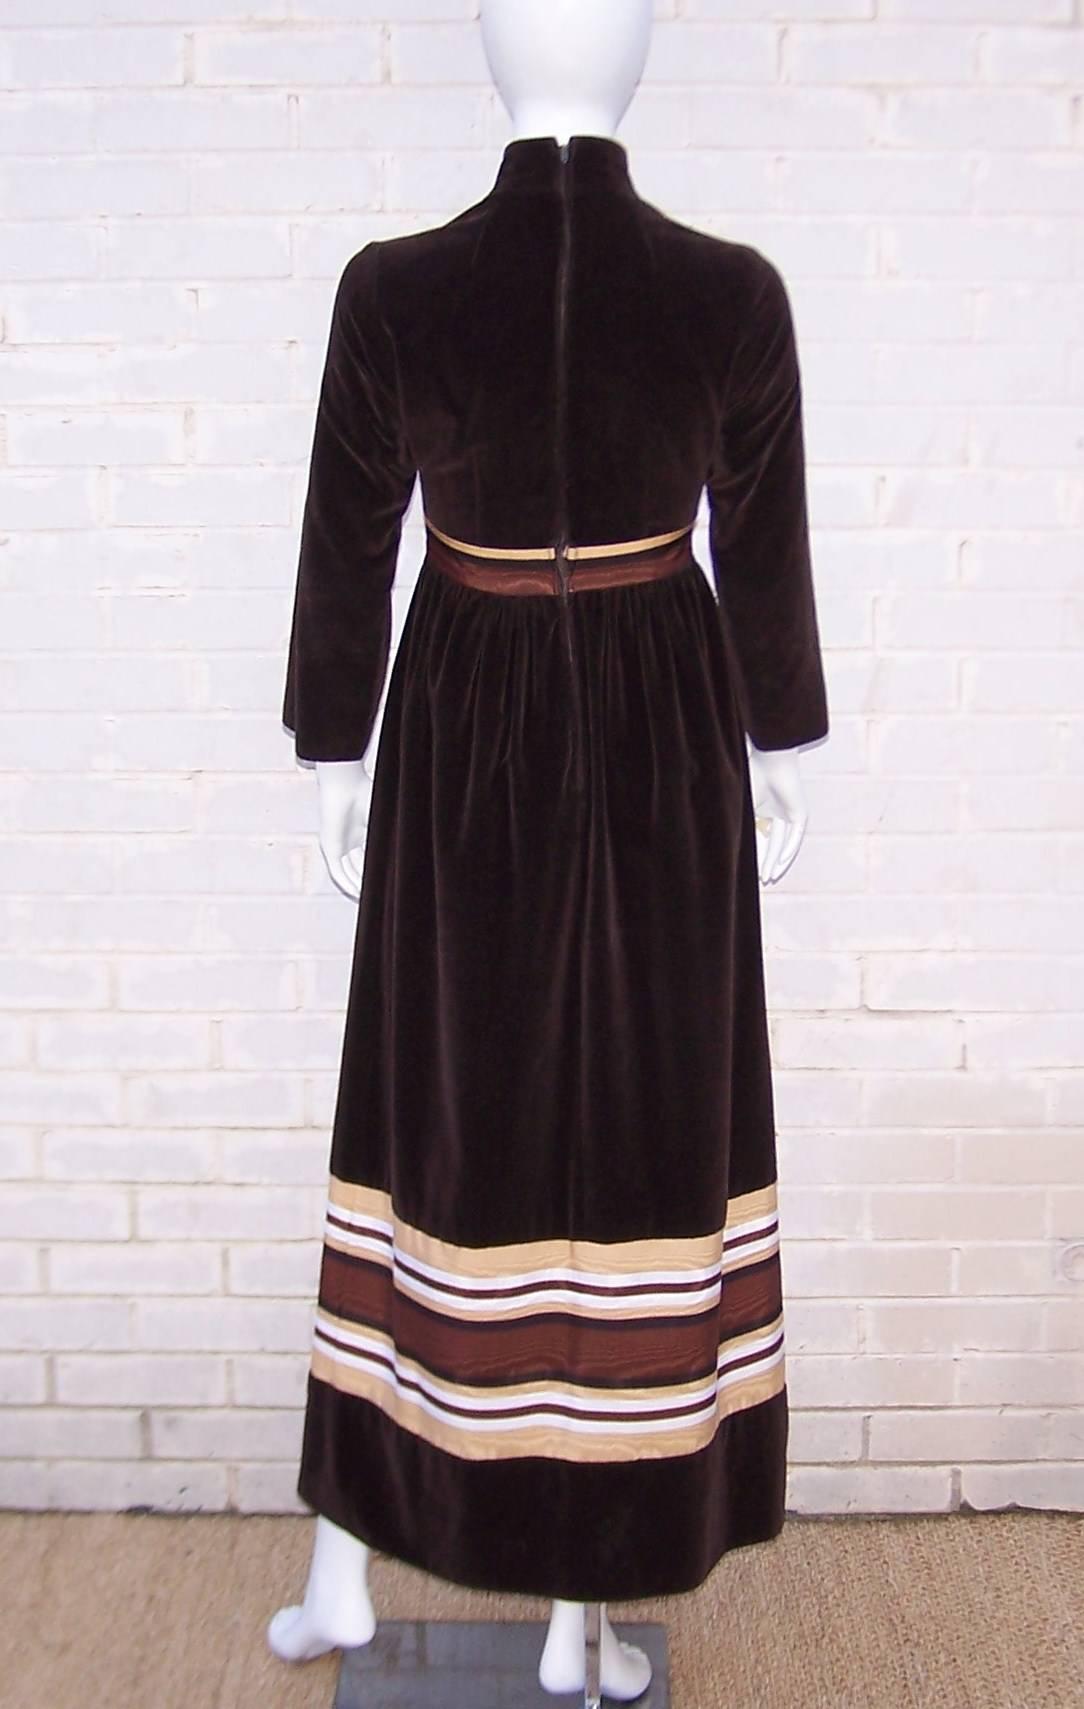 Women's 1970's A. J. Bari Chocolate Brown Velveteen Maxi Dress With Moire Trim